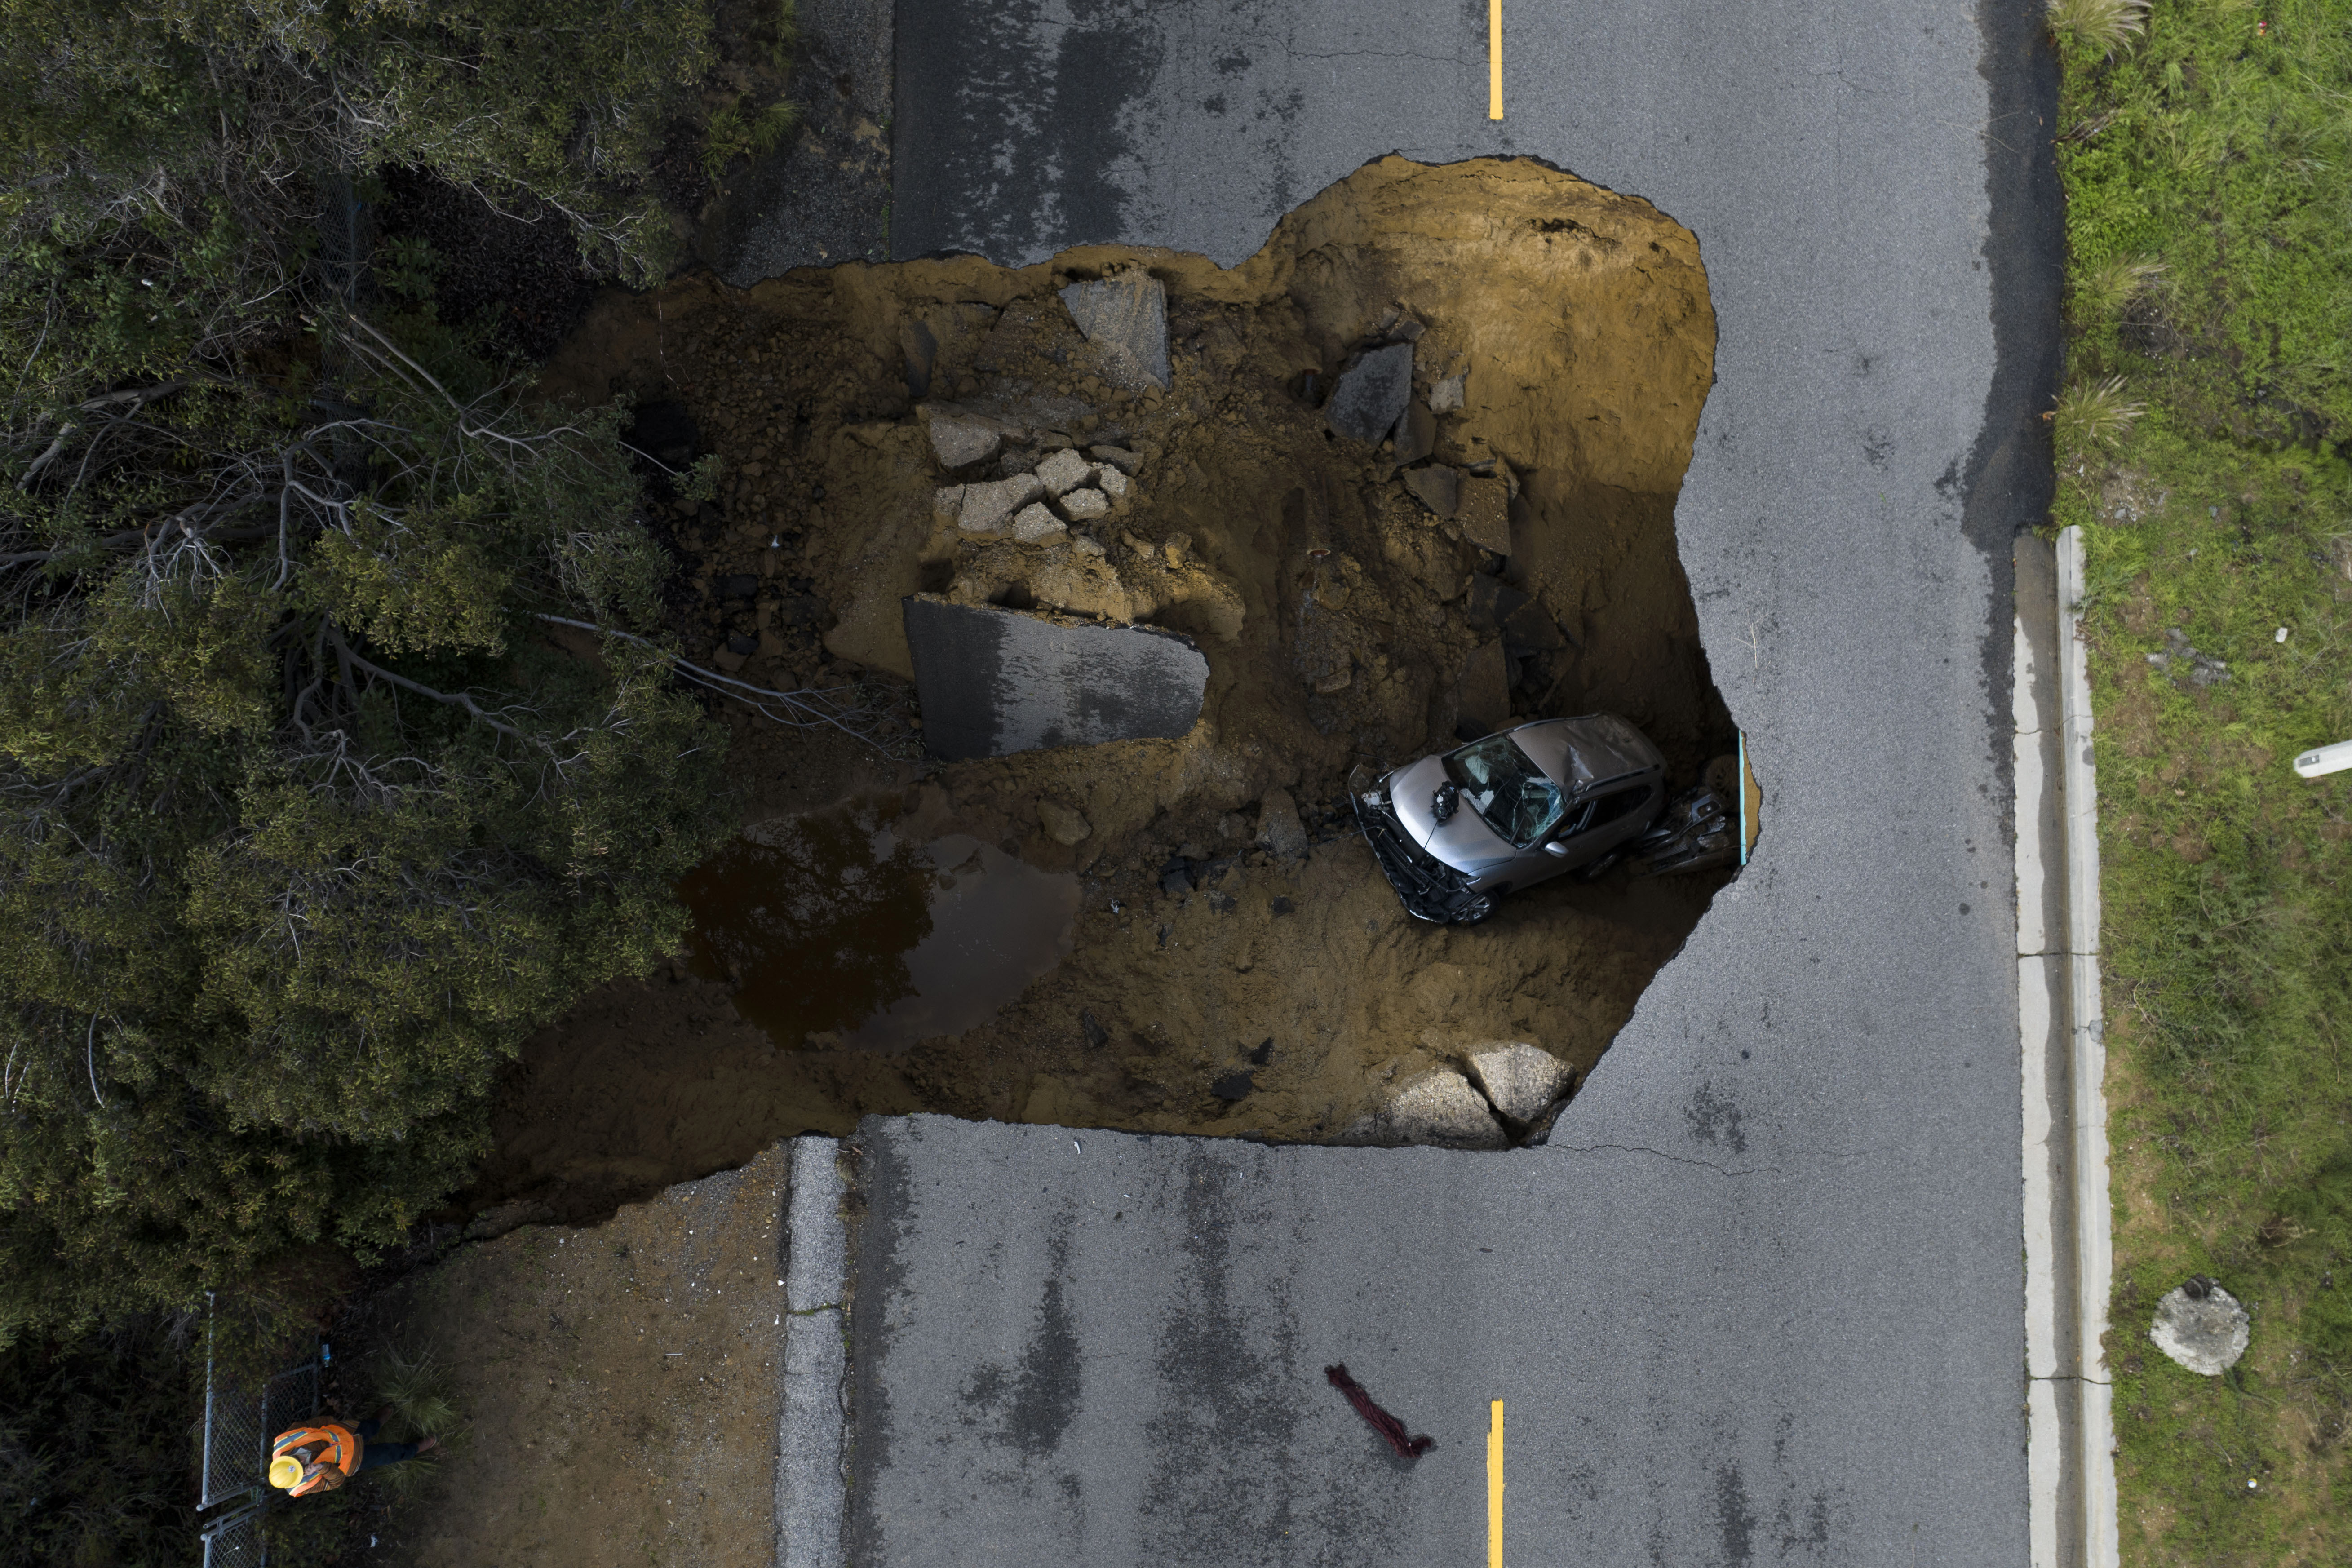 A vehicle is stuck in a sinkhole in the Chatsworth section of Los Angeles taken from a drone, Tuesday, Jan. 10, 2023.  